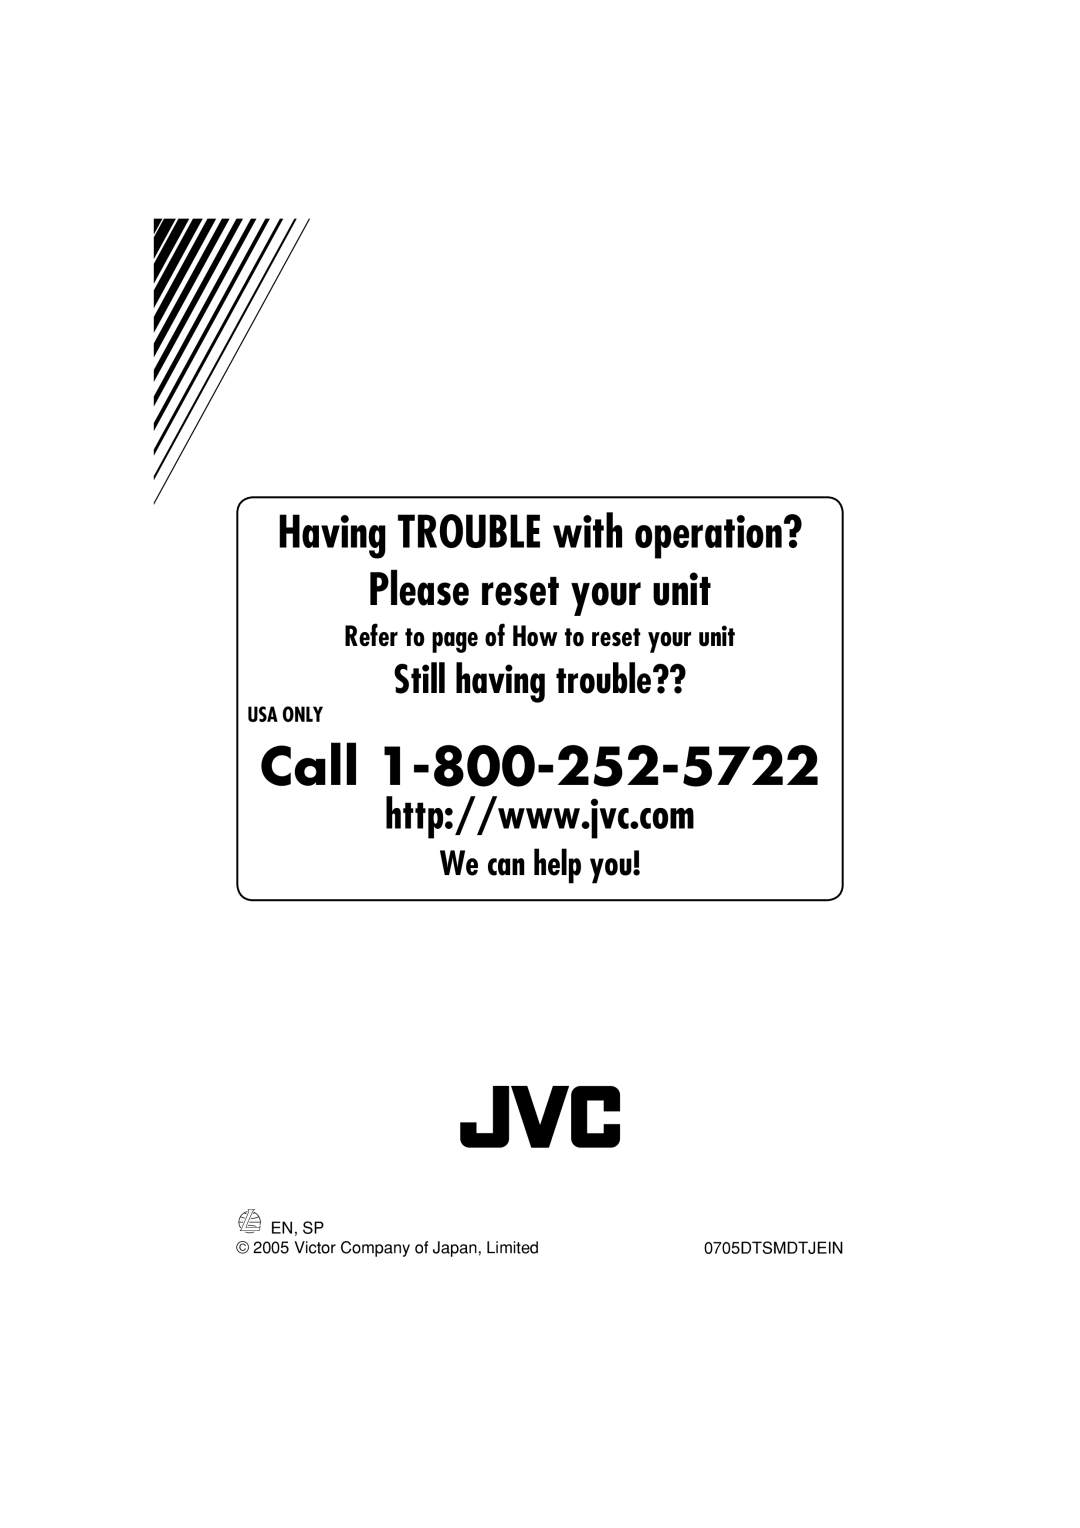 JVC KD-S52 manual We can help you, Refer to page of How to reset your unit, Usa Only, Call, Please reset your unit 